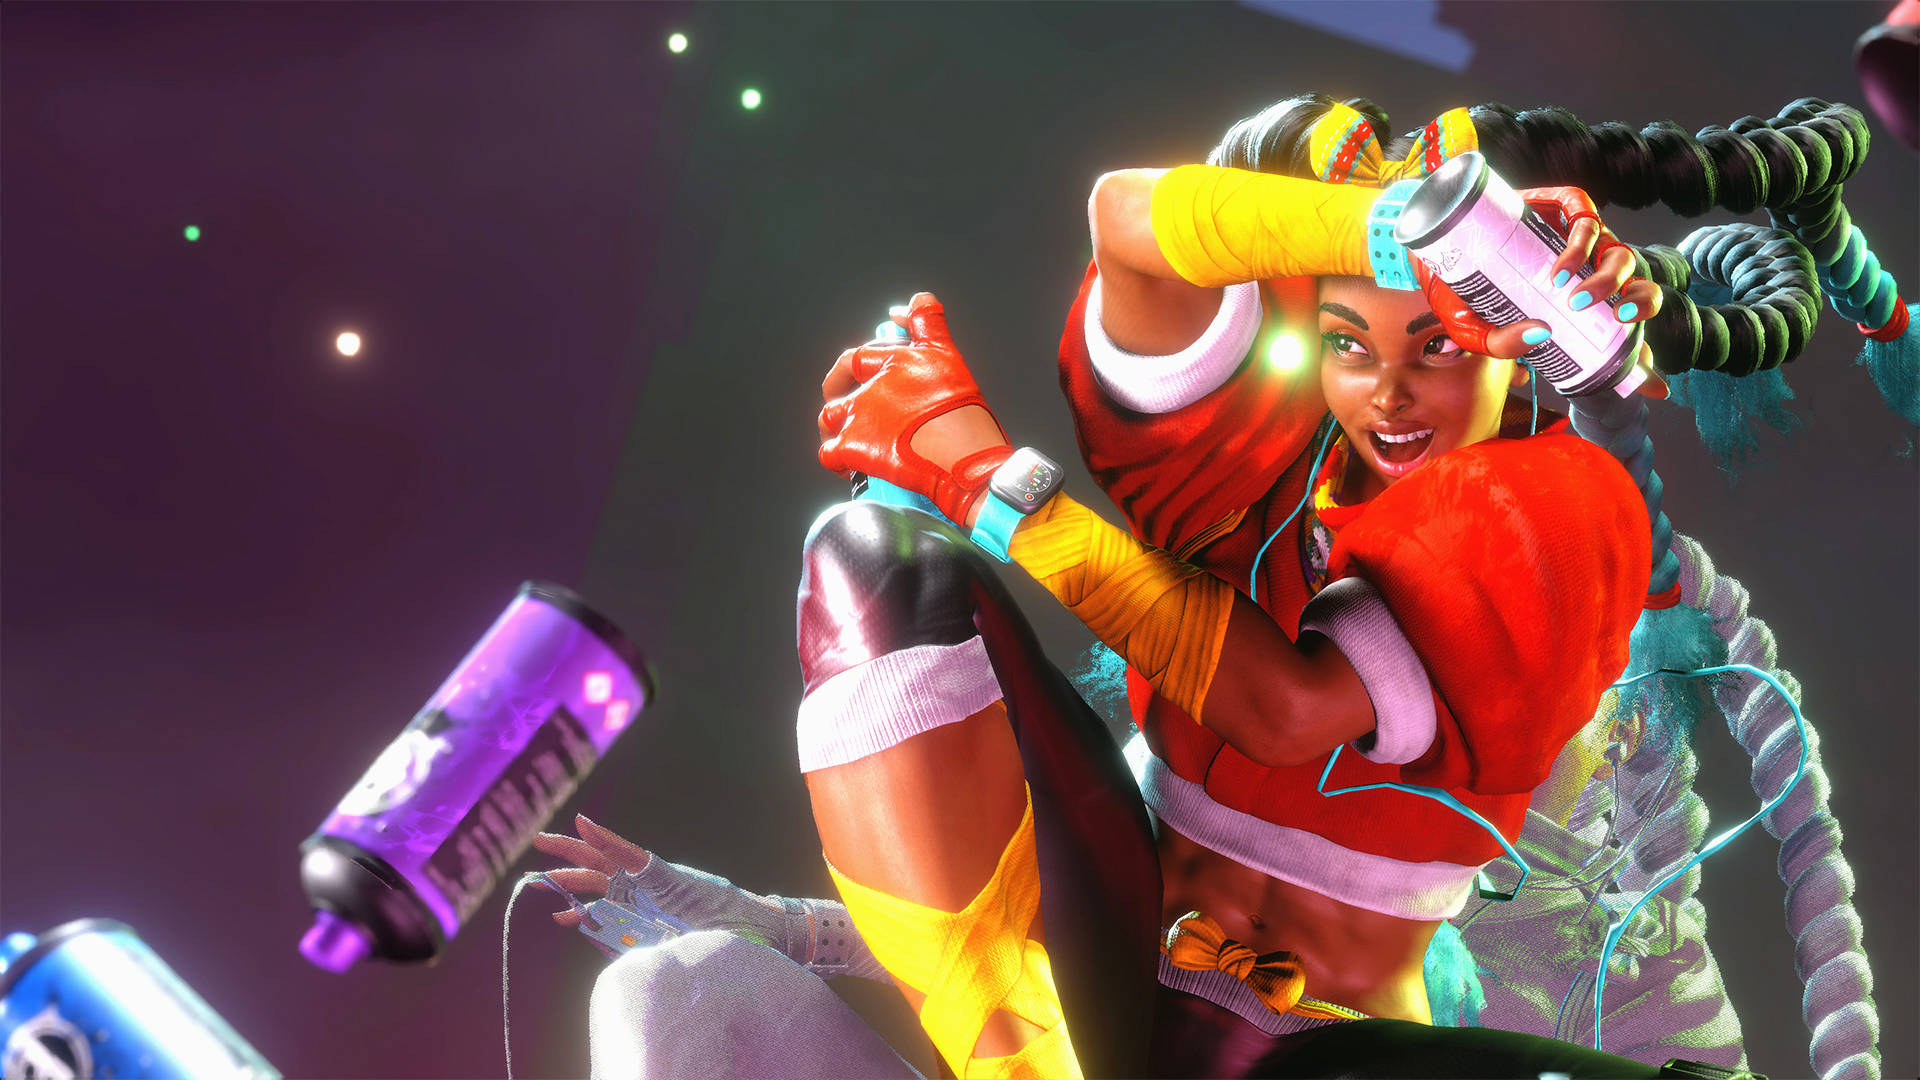 Street Fighter 6 lets players have lotsa fun with its character